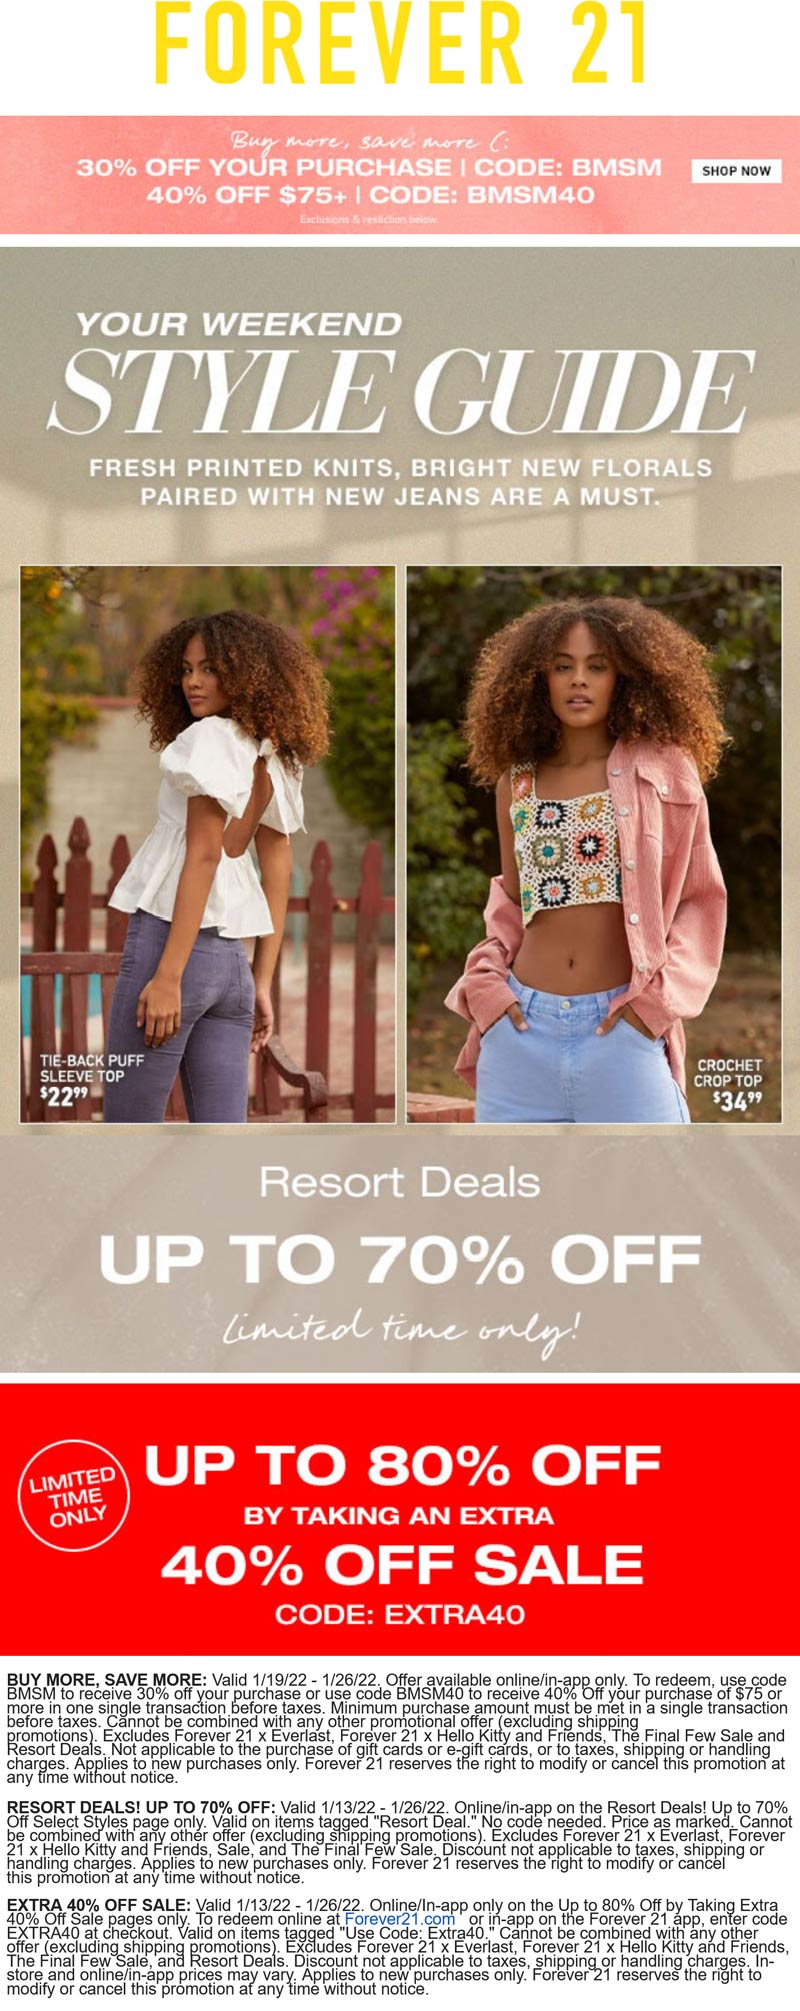 Forever 21 stores Coupon  30-40% off at Forever 21 via promo code BMSM & BMSM40 #forever21 